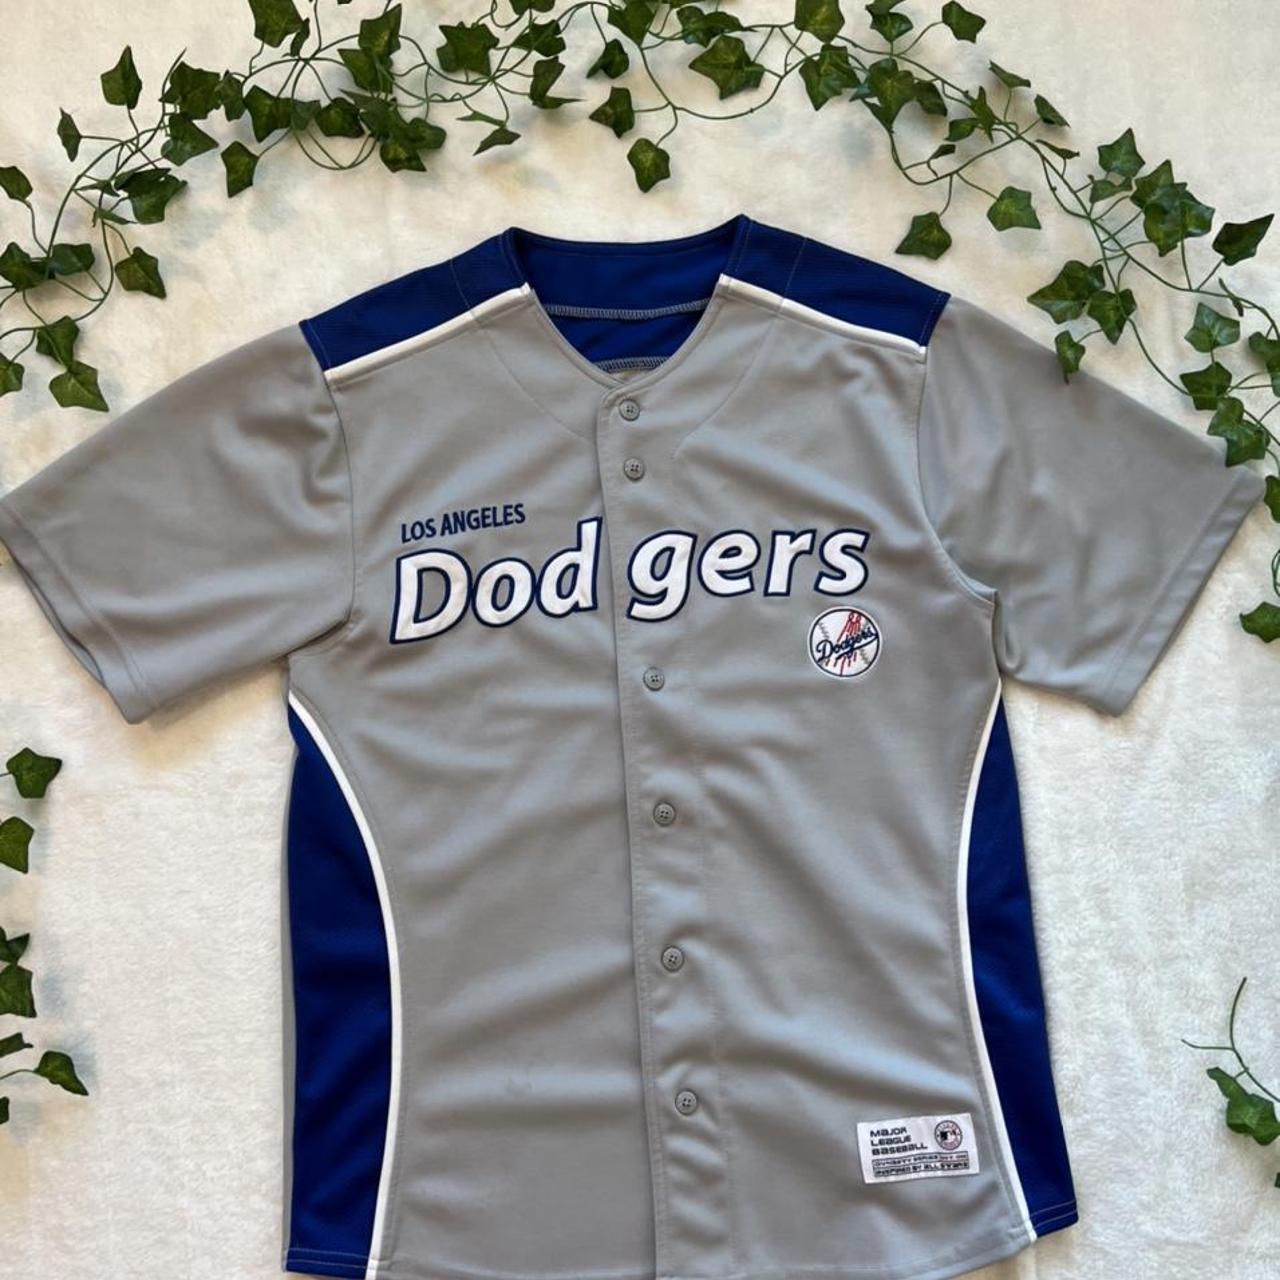 Product Image 1 - Dodgers Jersey (M)
- $25 +